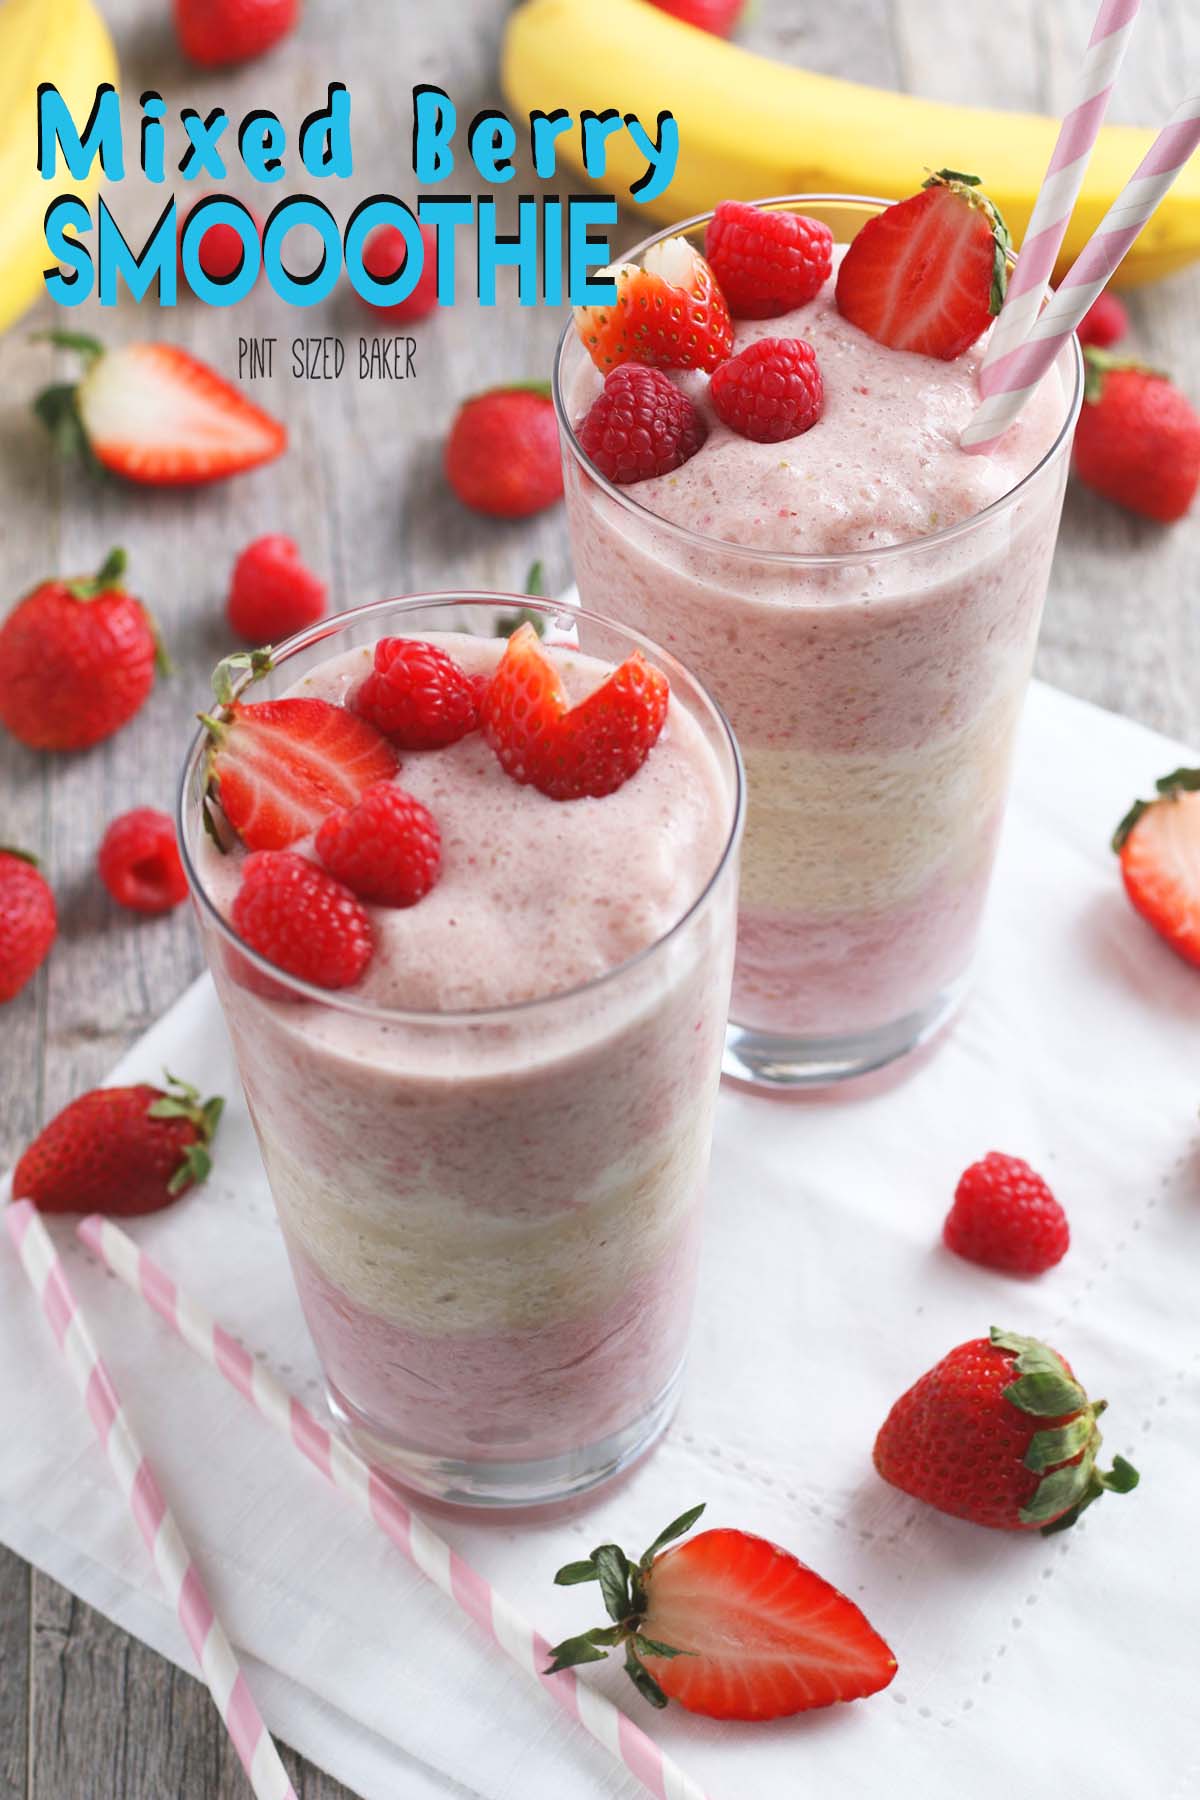 Sweet strawberries, raspberries, and banana make a great layered smoothie. Add some vanilla protein powder to this mixed berry smoothie to stay full all morning long!